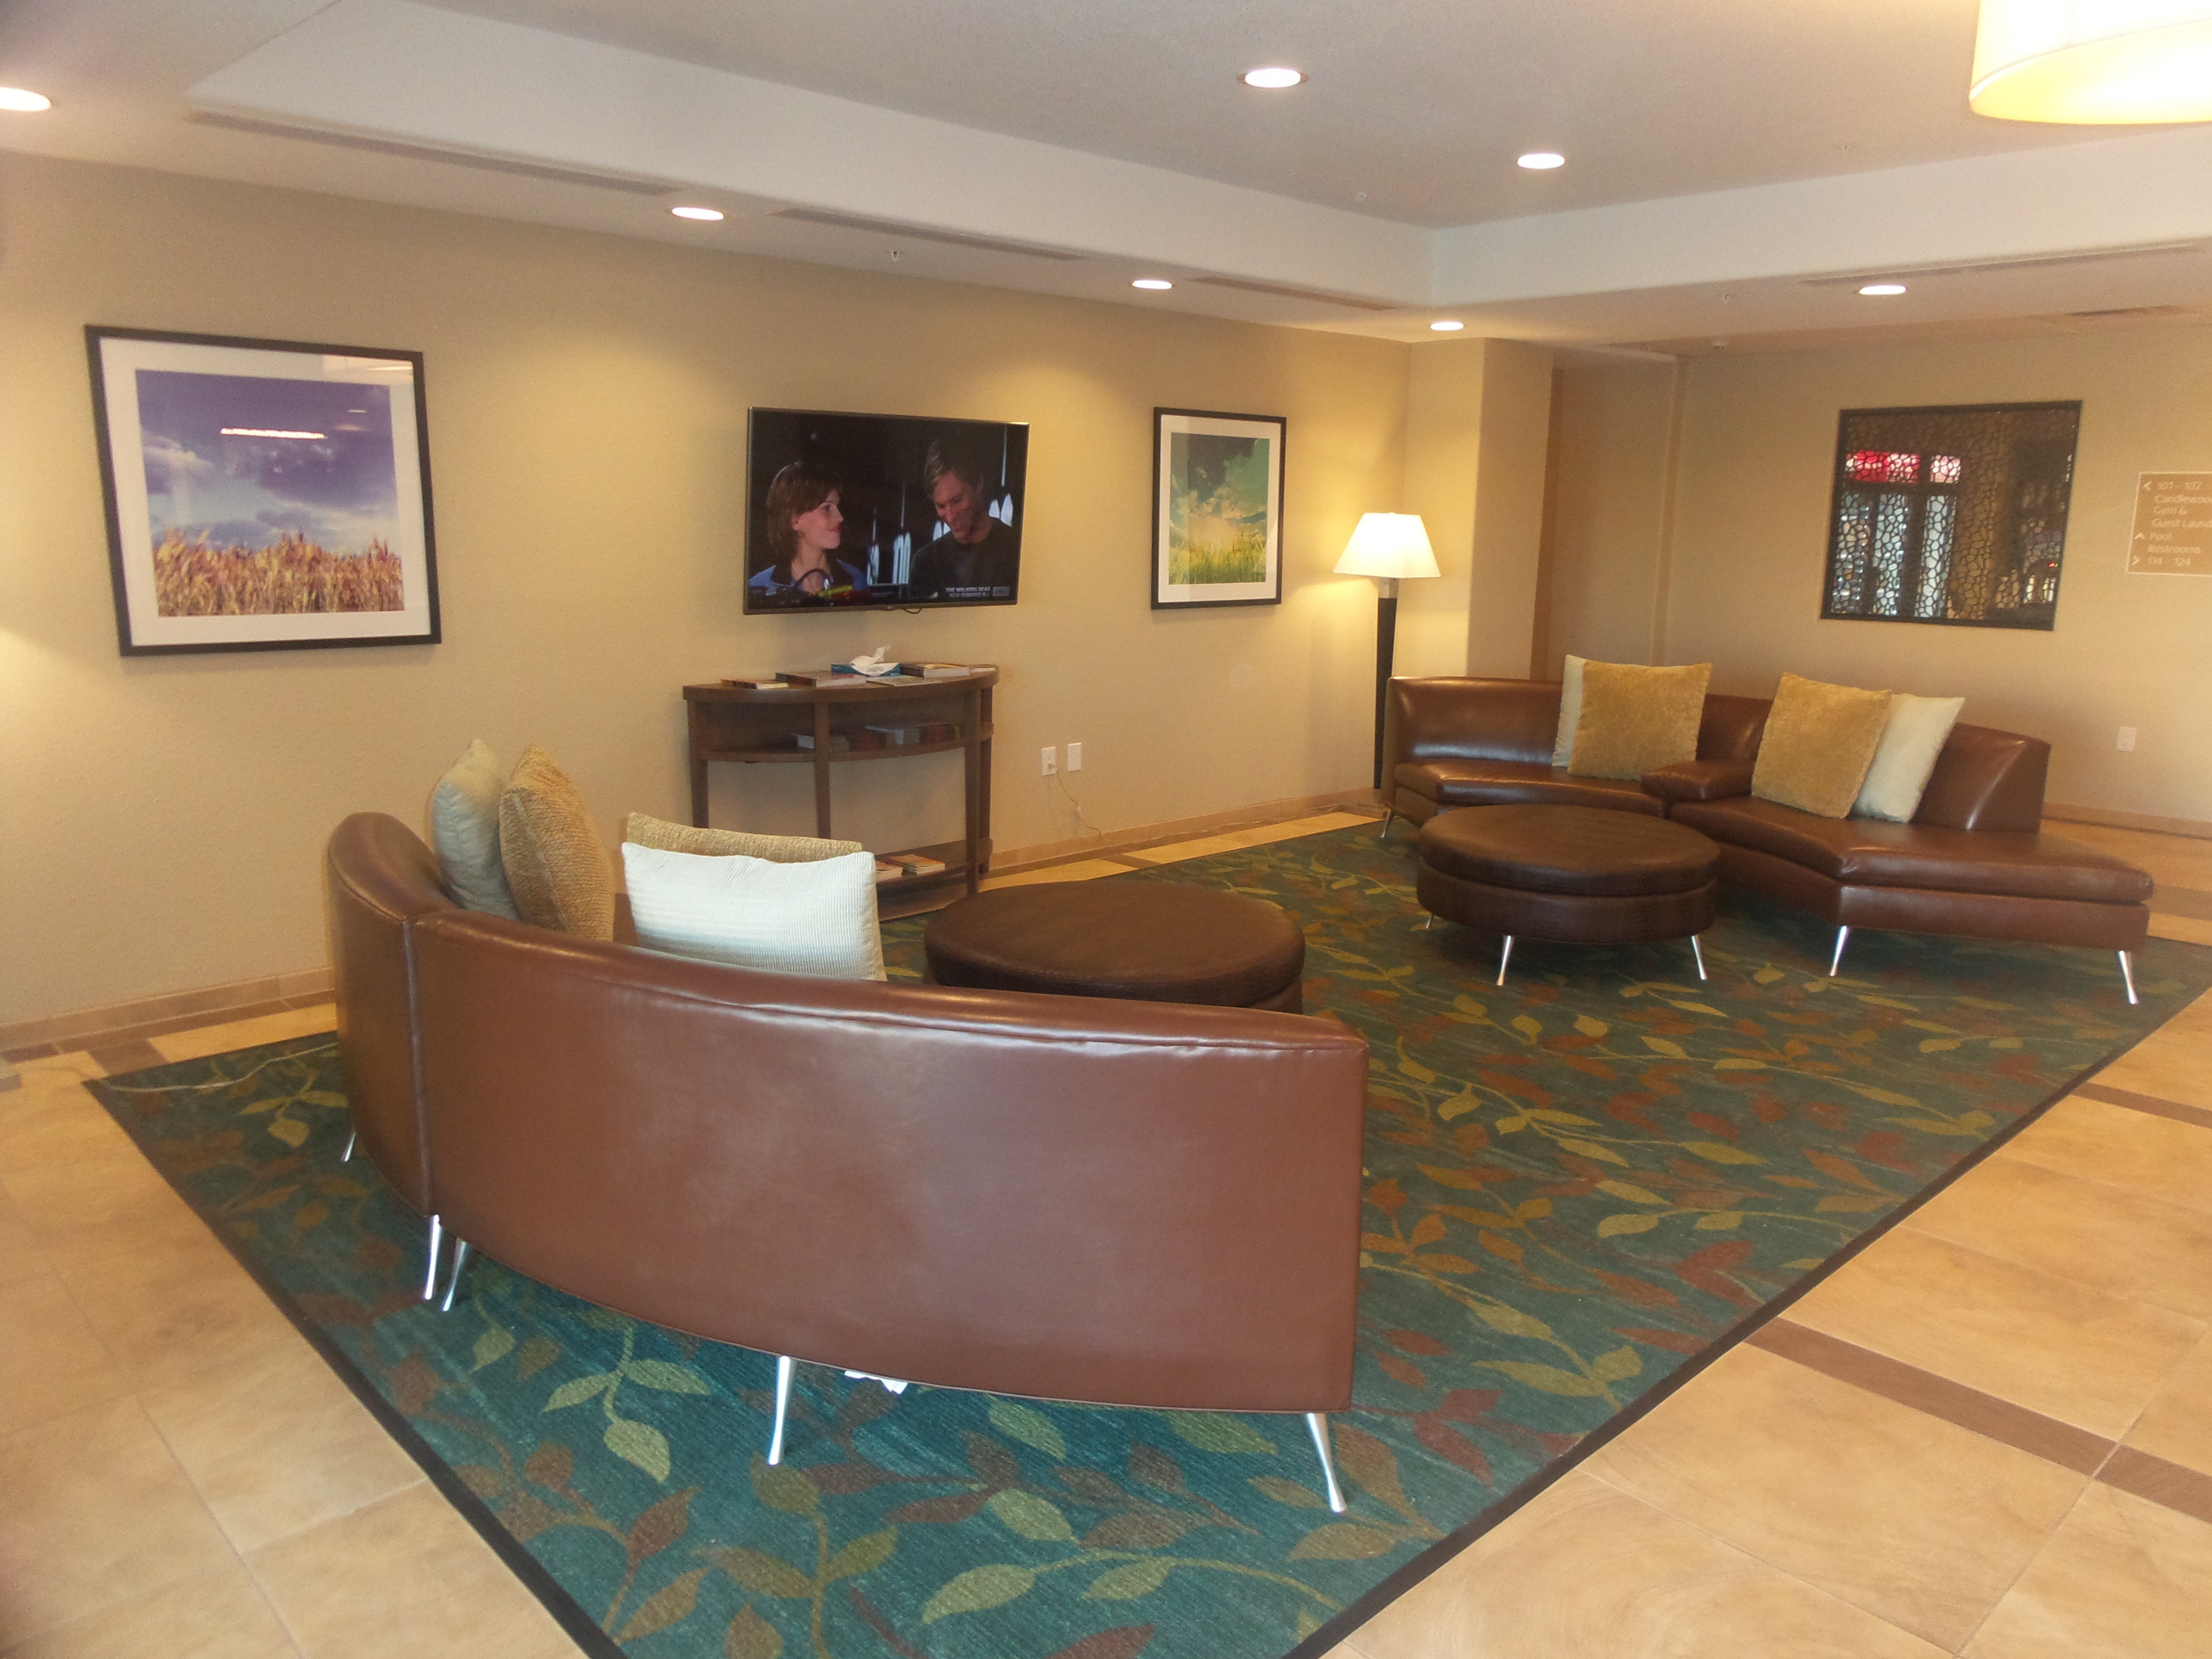 We welcome you to our modern and inviting lobby. Sit back & enjoy.